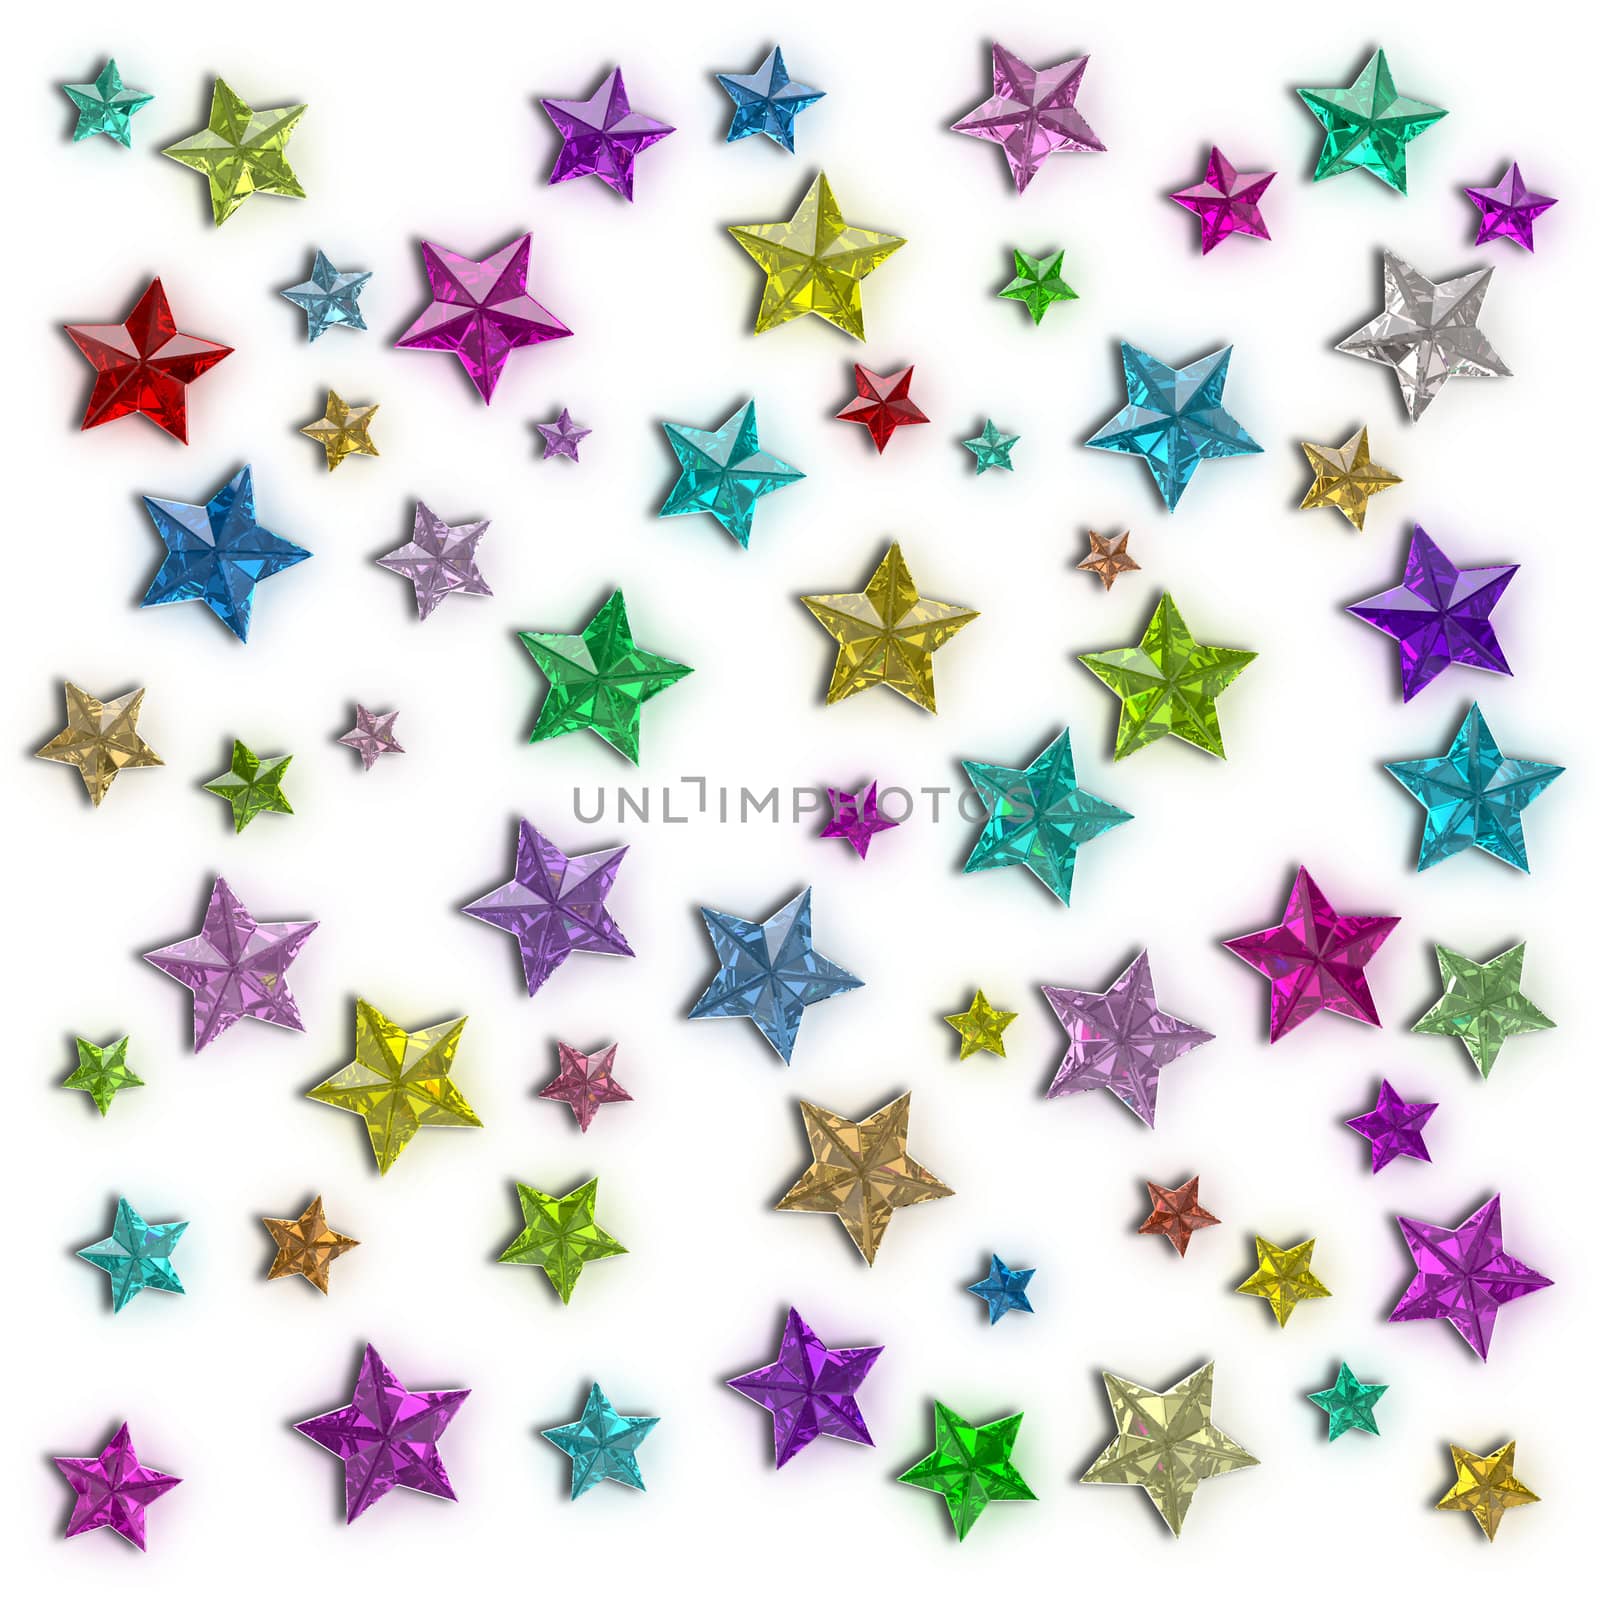 Colorful stars of the different sizes consisting of multi-colored shining gems